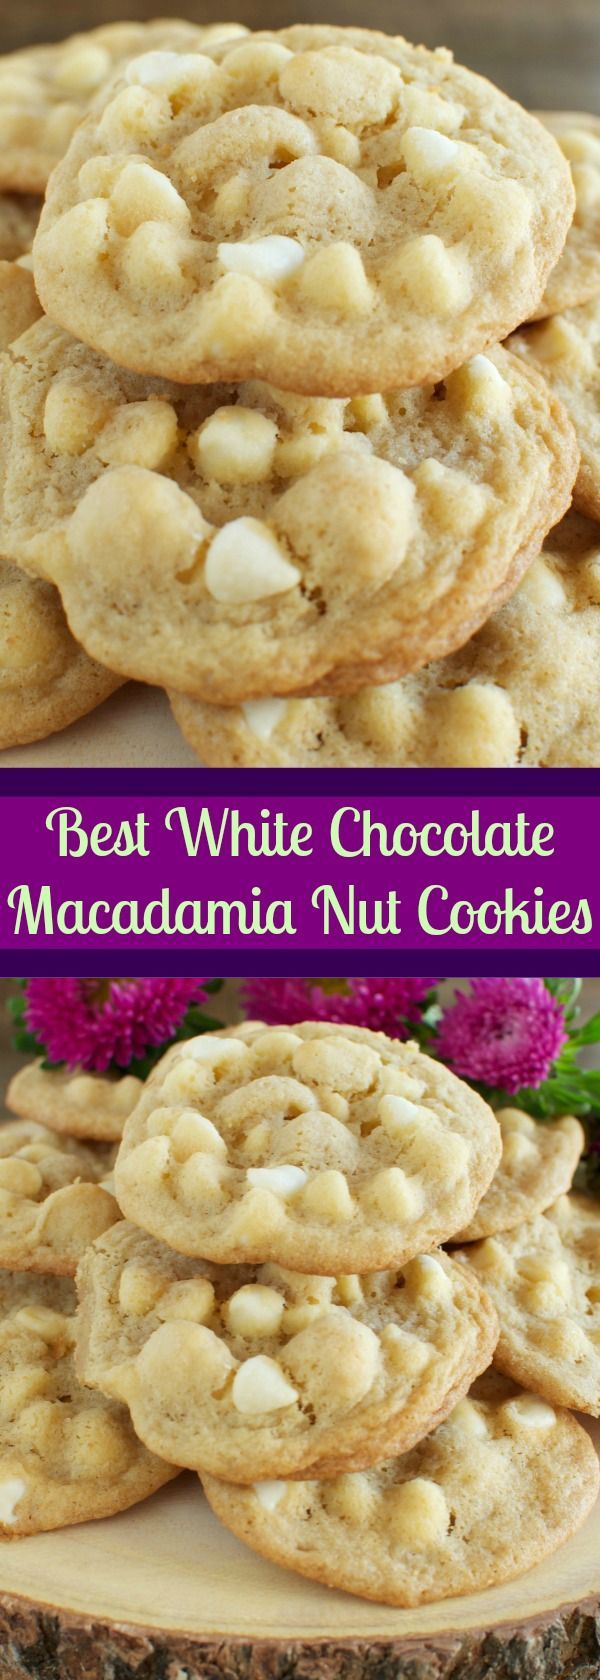 The BEST White Chocolate Macadamia Nut Cookies Ever!!! Chewy and buttery and total